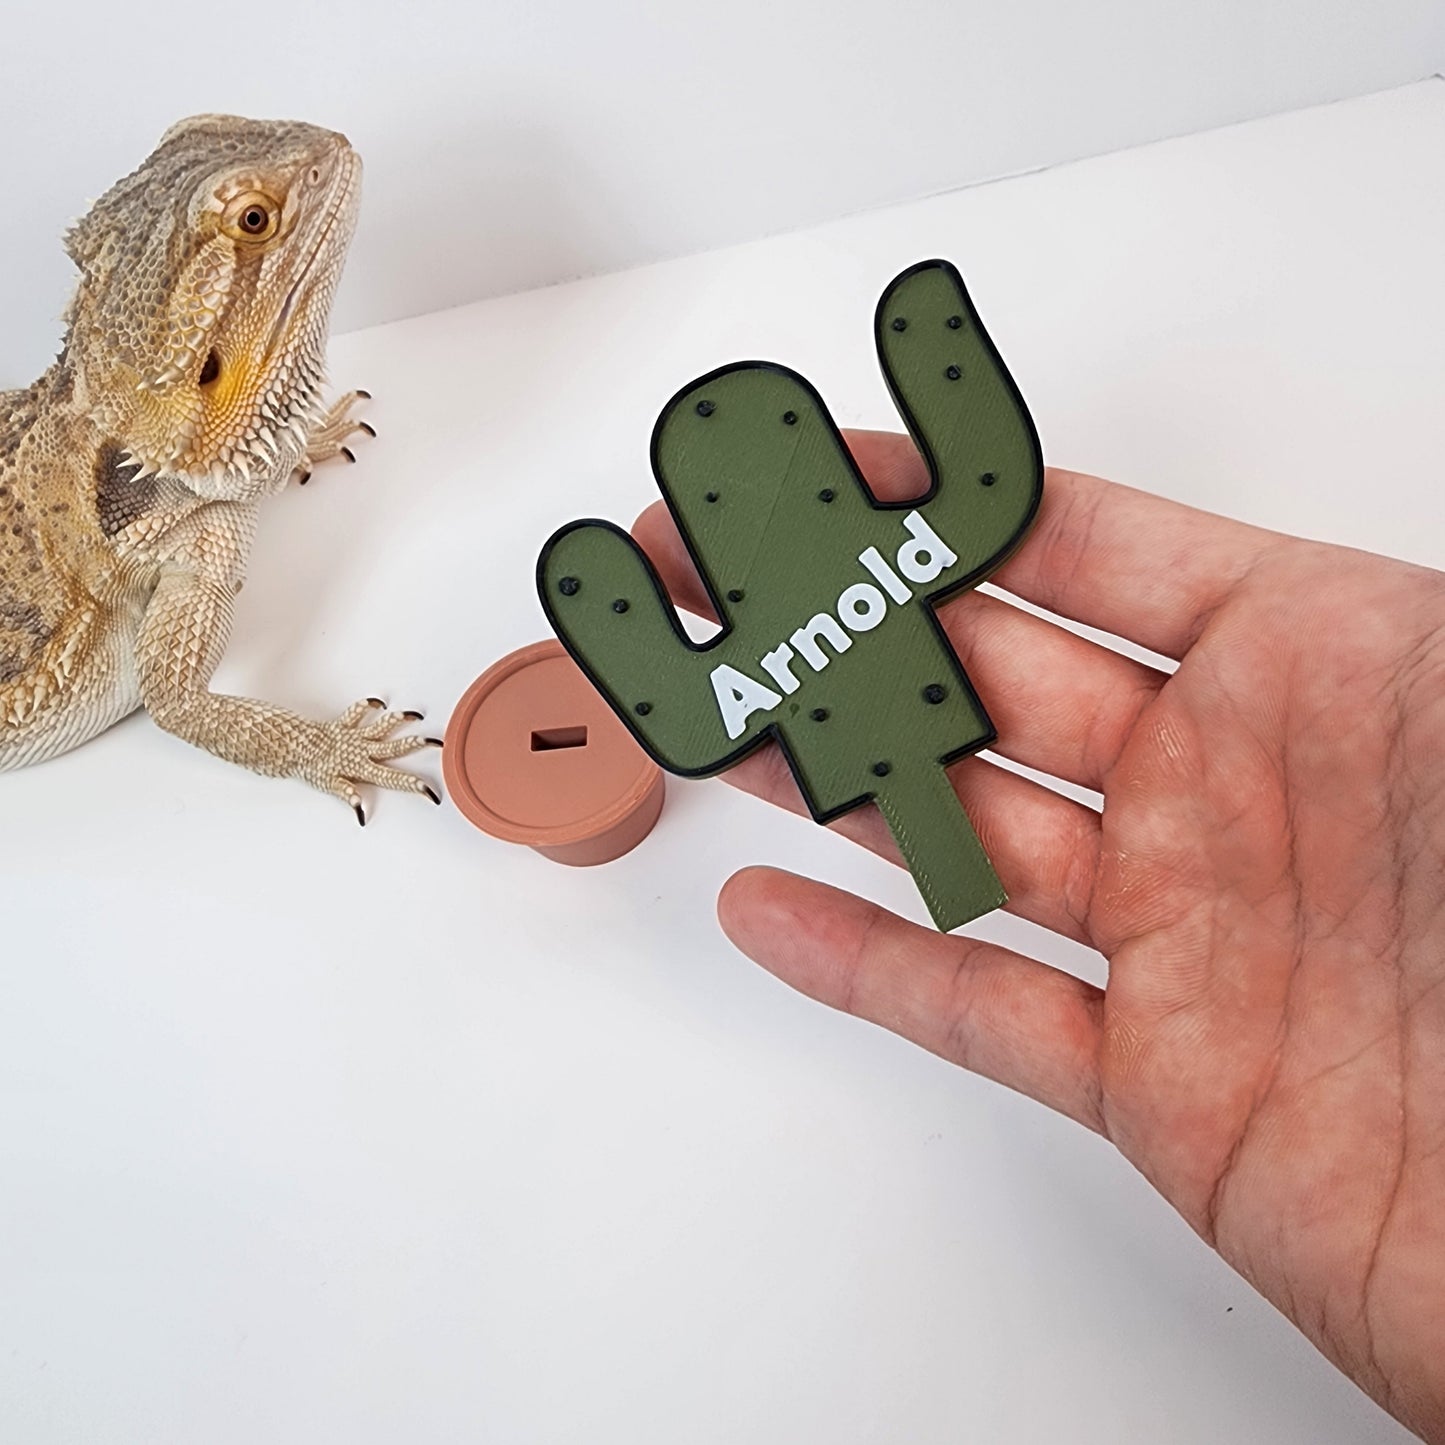 Personalized Cactus Name Sign with Stand for Amphibians, Reptiles and More! Bearded dragons, Geckos, Tarantulas, Snakes...